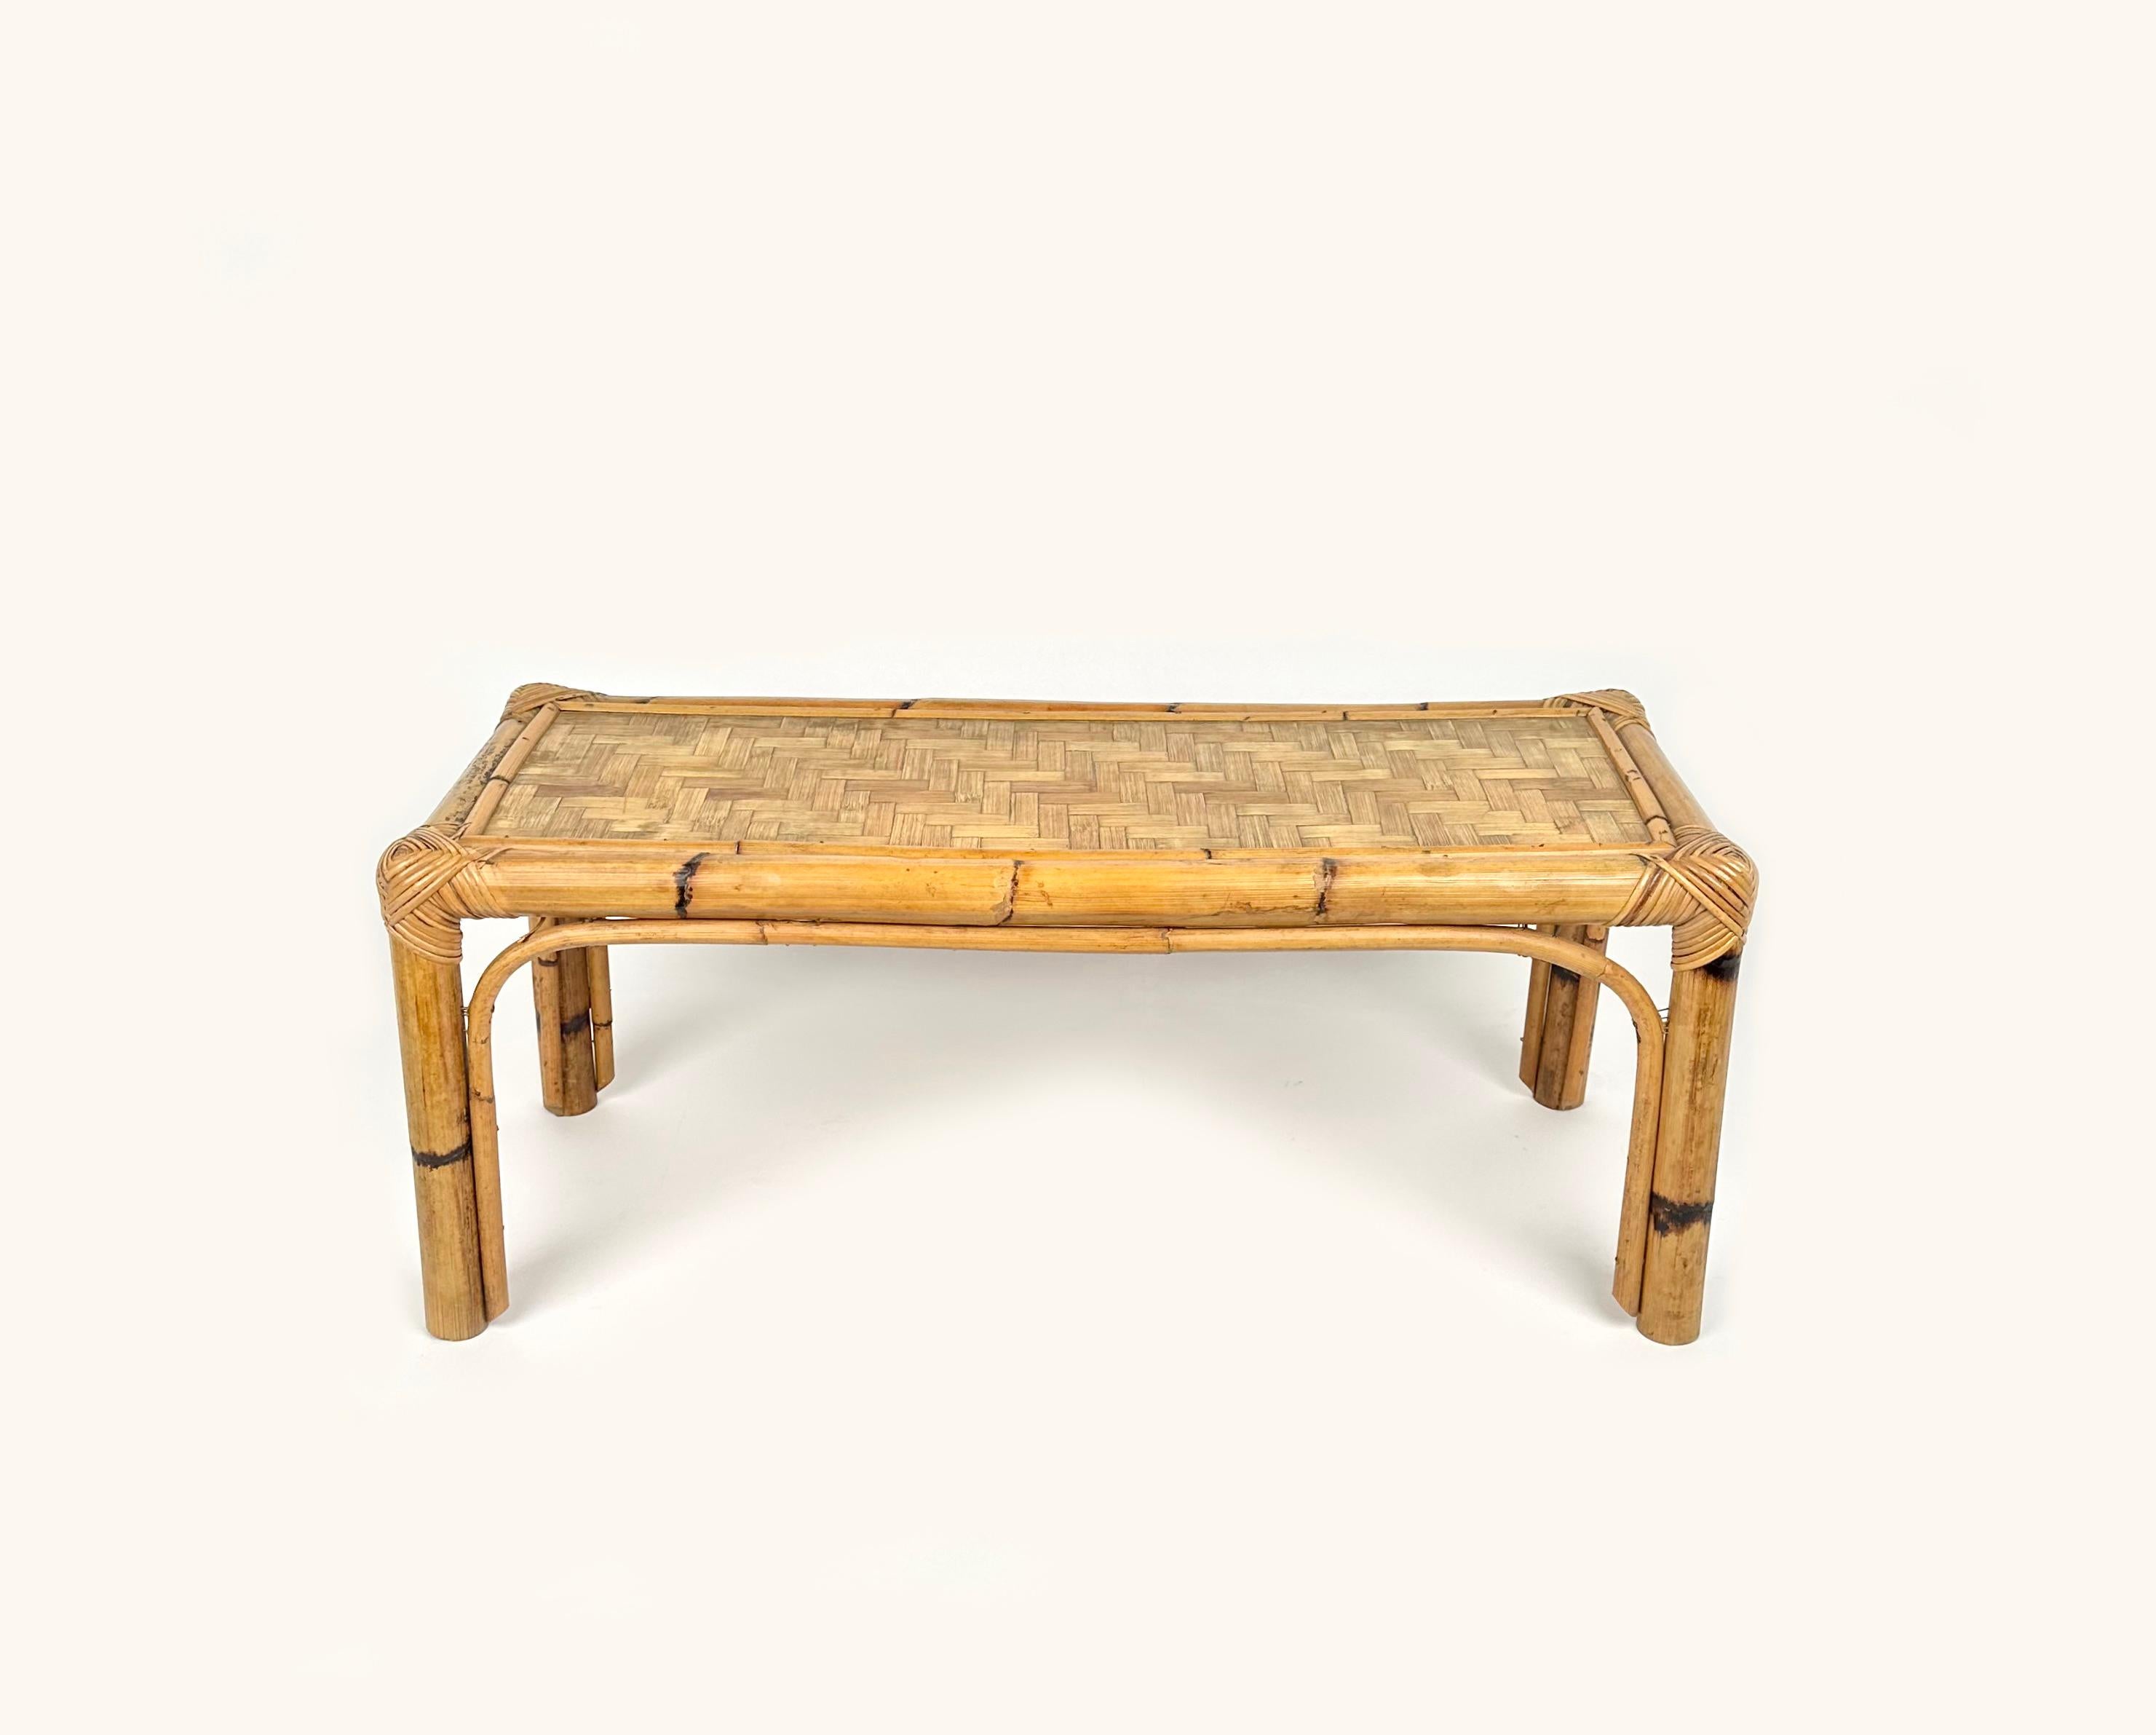 Mid-century rectangular coffee table in bamboo and rattan in the style of Vivai Del Sud.

Made in Italy in the 1960s.